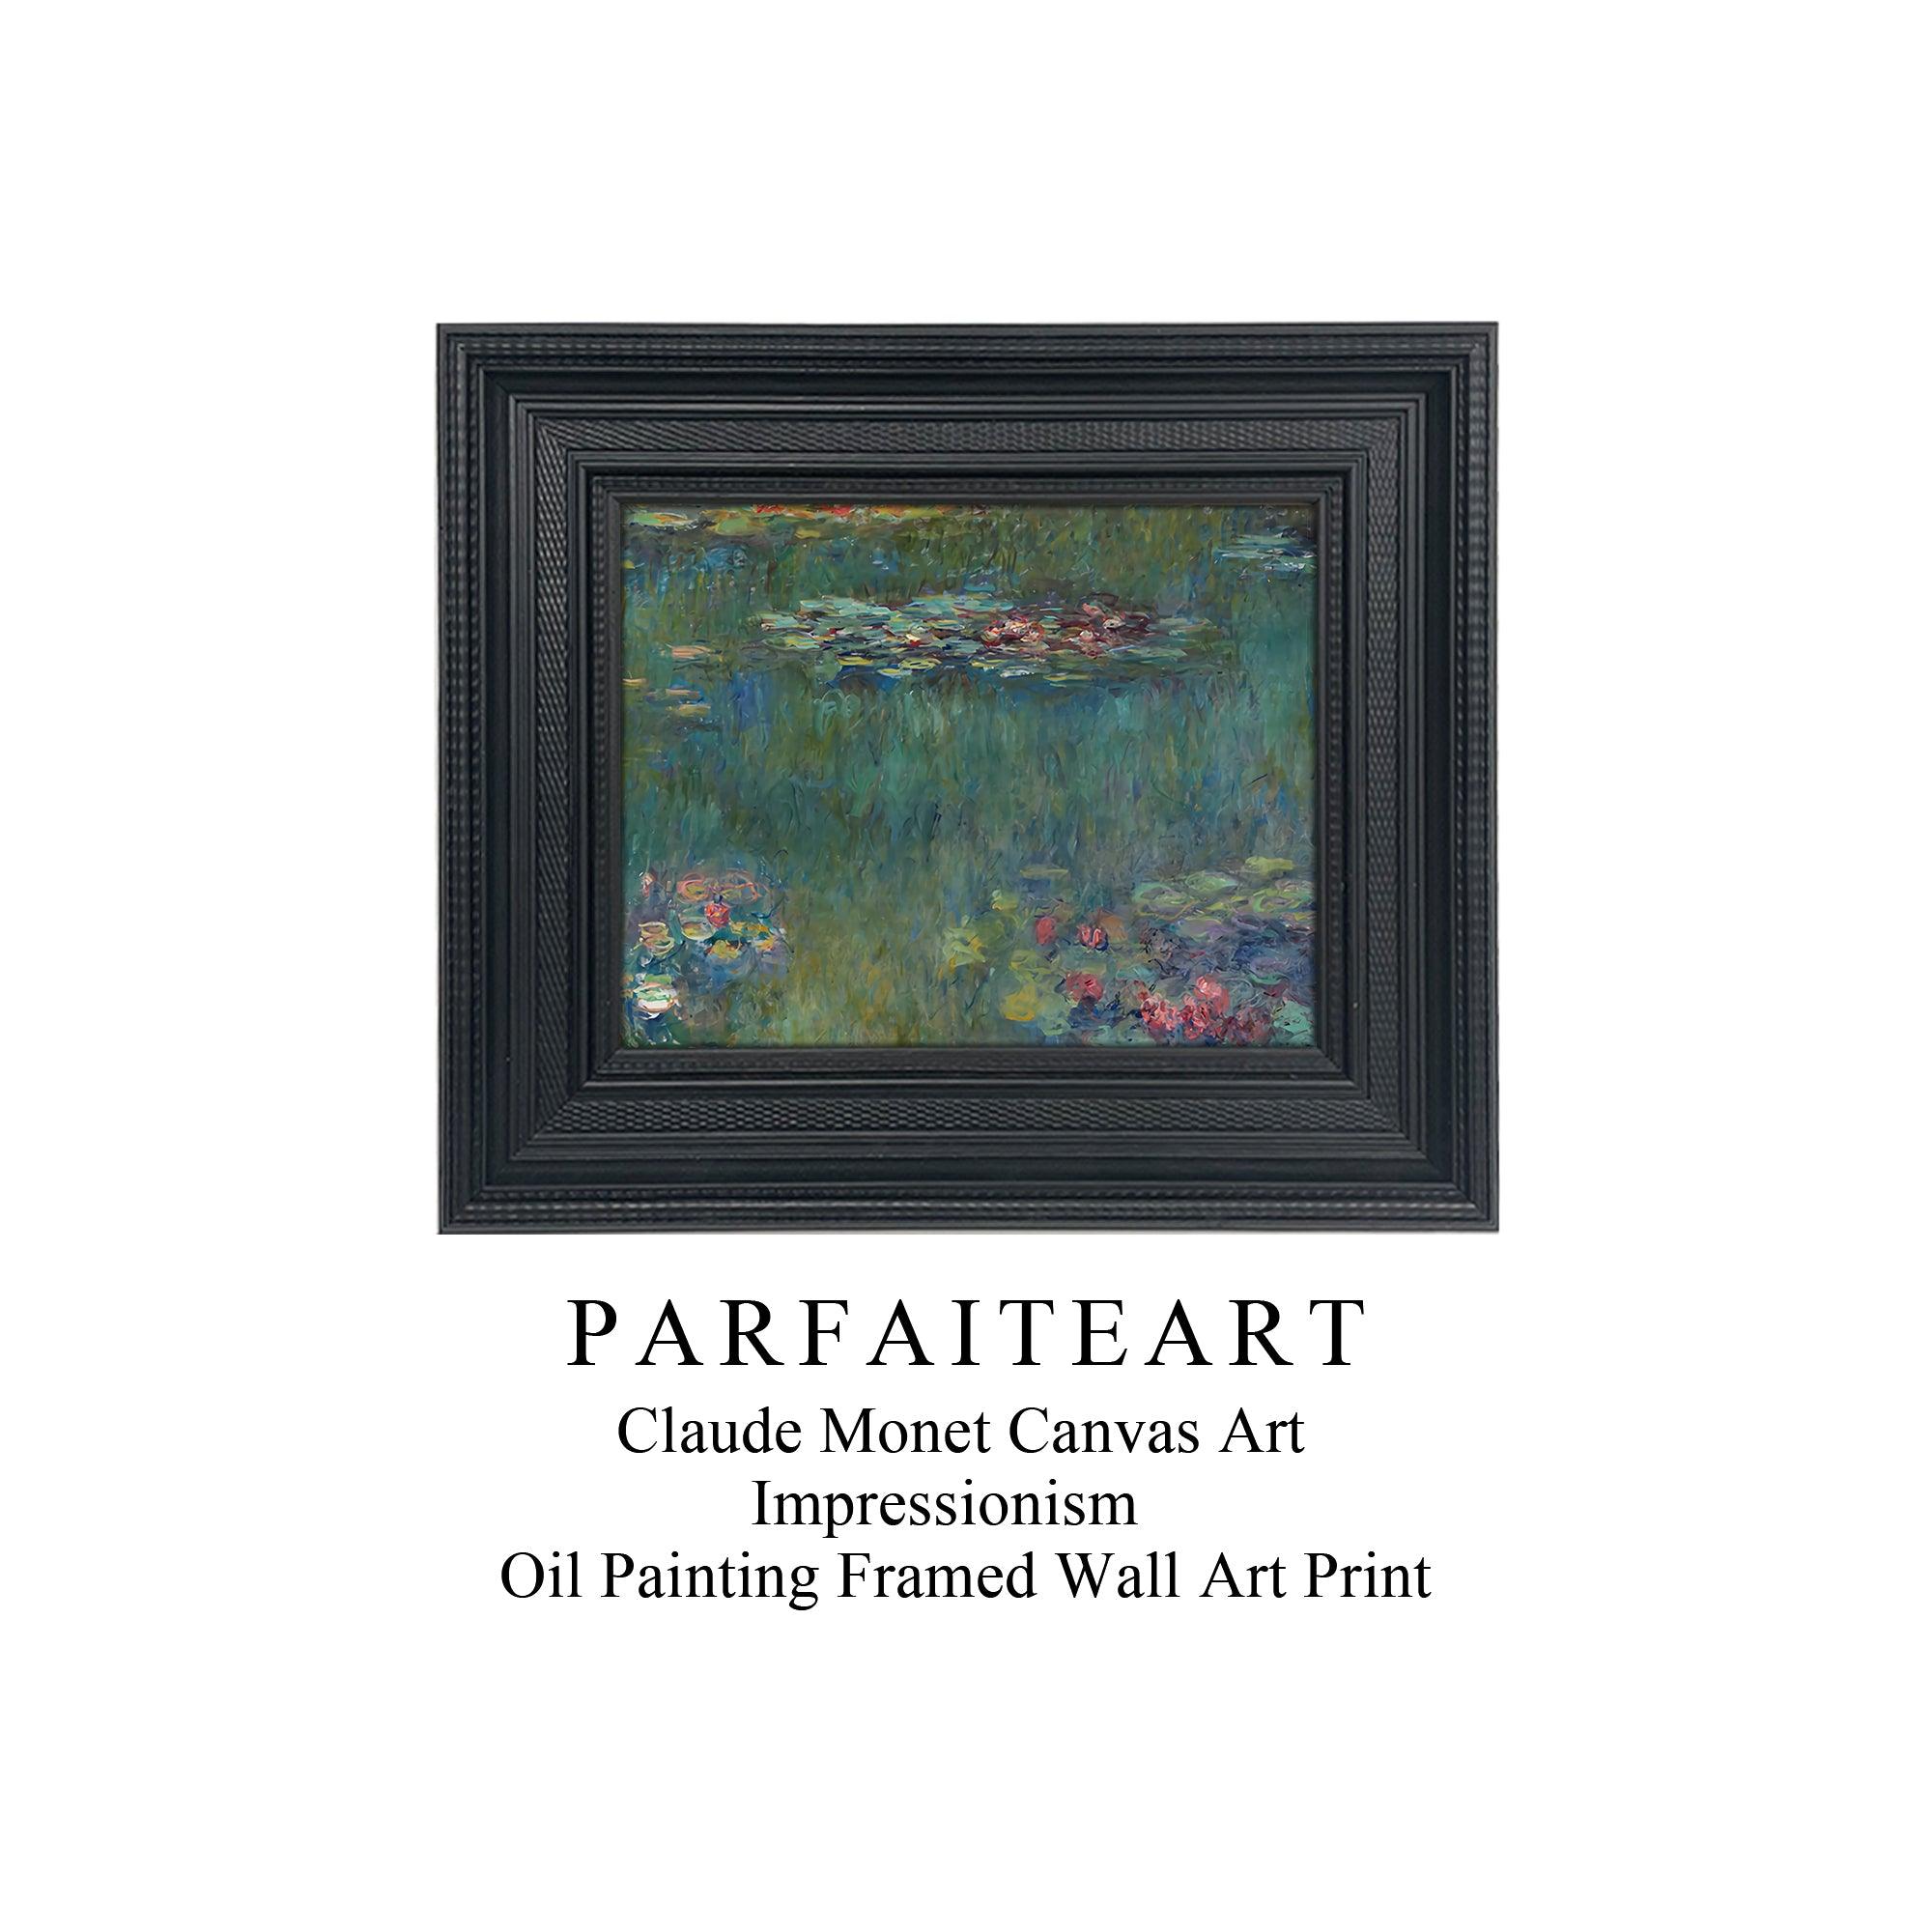 Famous Painting Print，Claude Monet，Moody Wall Decor，Black Vintage Frame,Solid Wood,High-Quality Waterproof Decorative Canvas Art， Hotel Aisle Living Room Home Decor Art 18x15 inches 2 Black